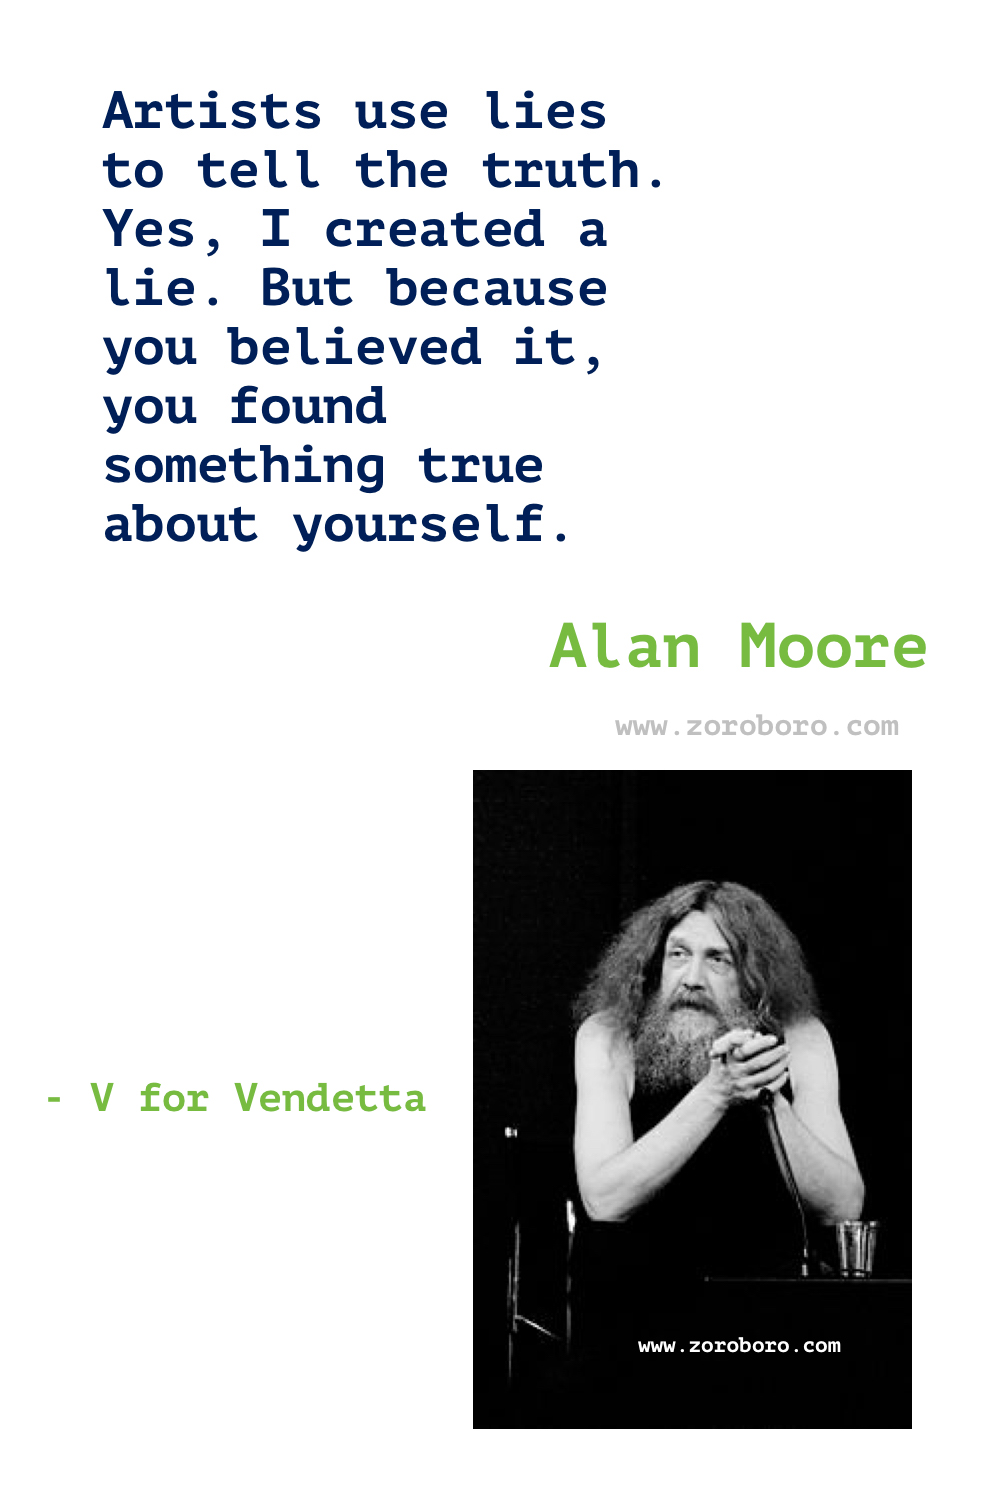 Alan Moore Quotes. Alan Moore V for Vendetta Quotes. Alan Moore Watchmen Quotes. Alan Moore Books/Movies Quotes. Alan Moore Quotes